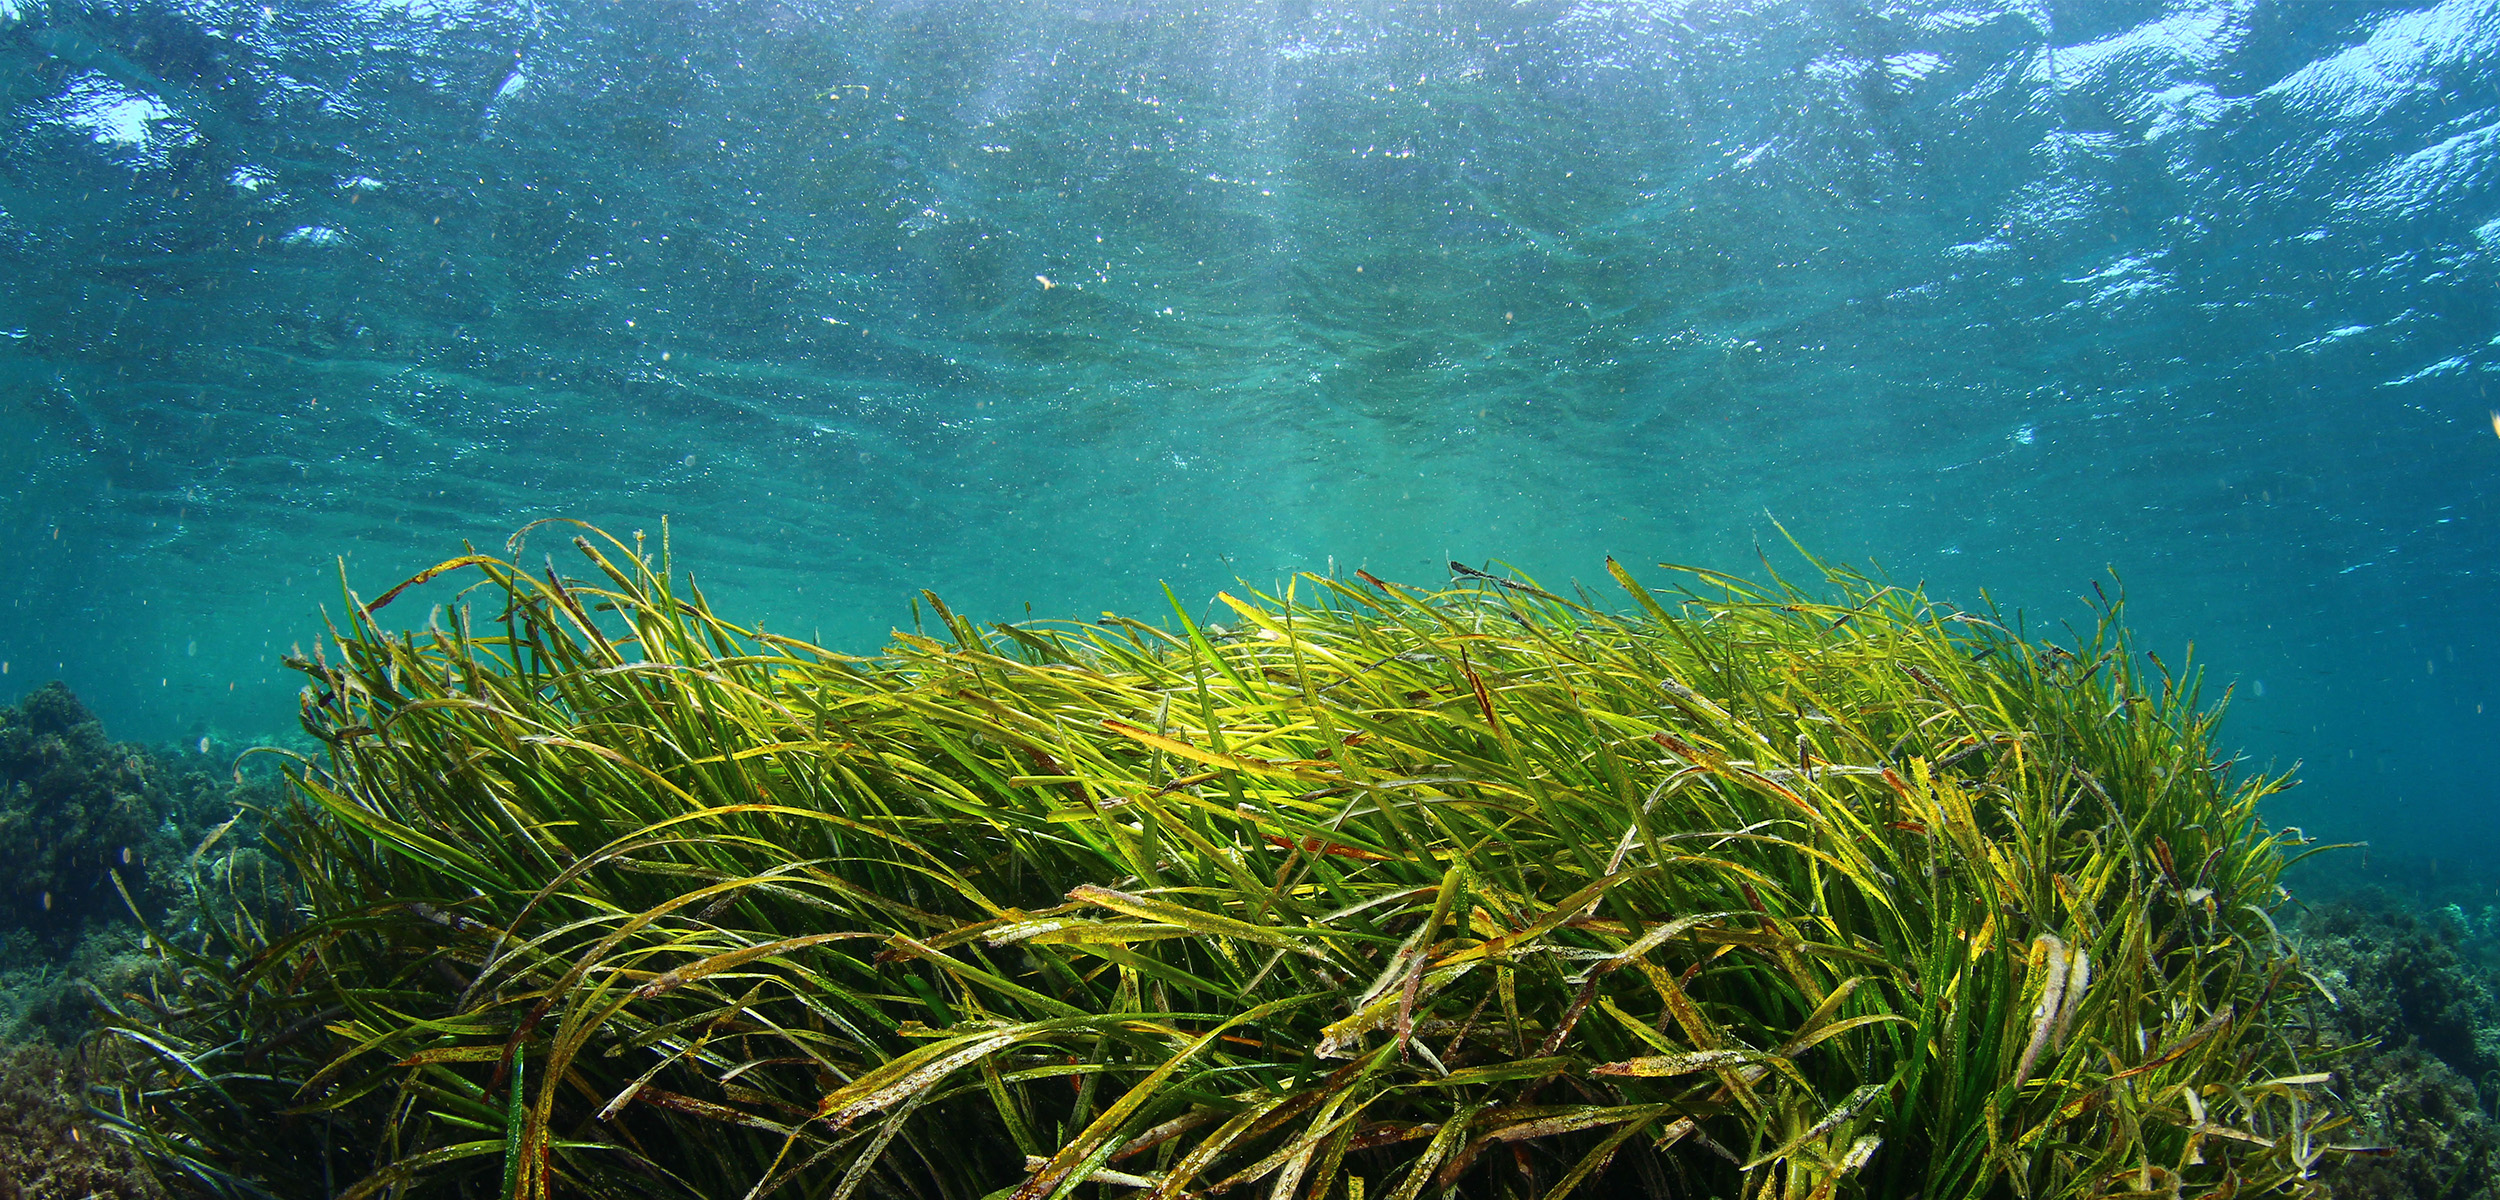 green blades of seagrass sit at the front of the photo with a bright blue open ocean in behind